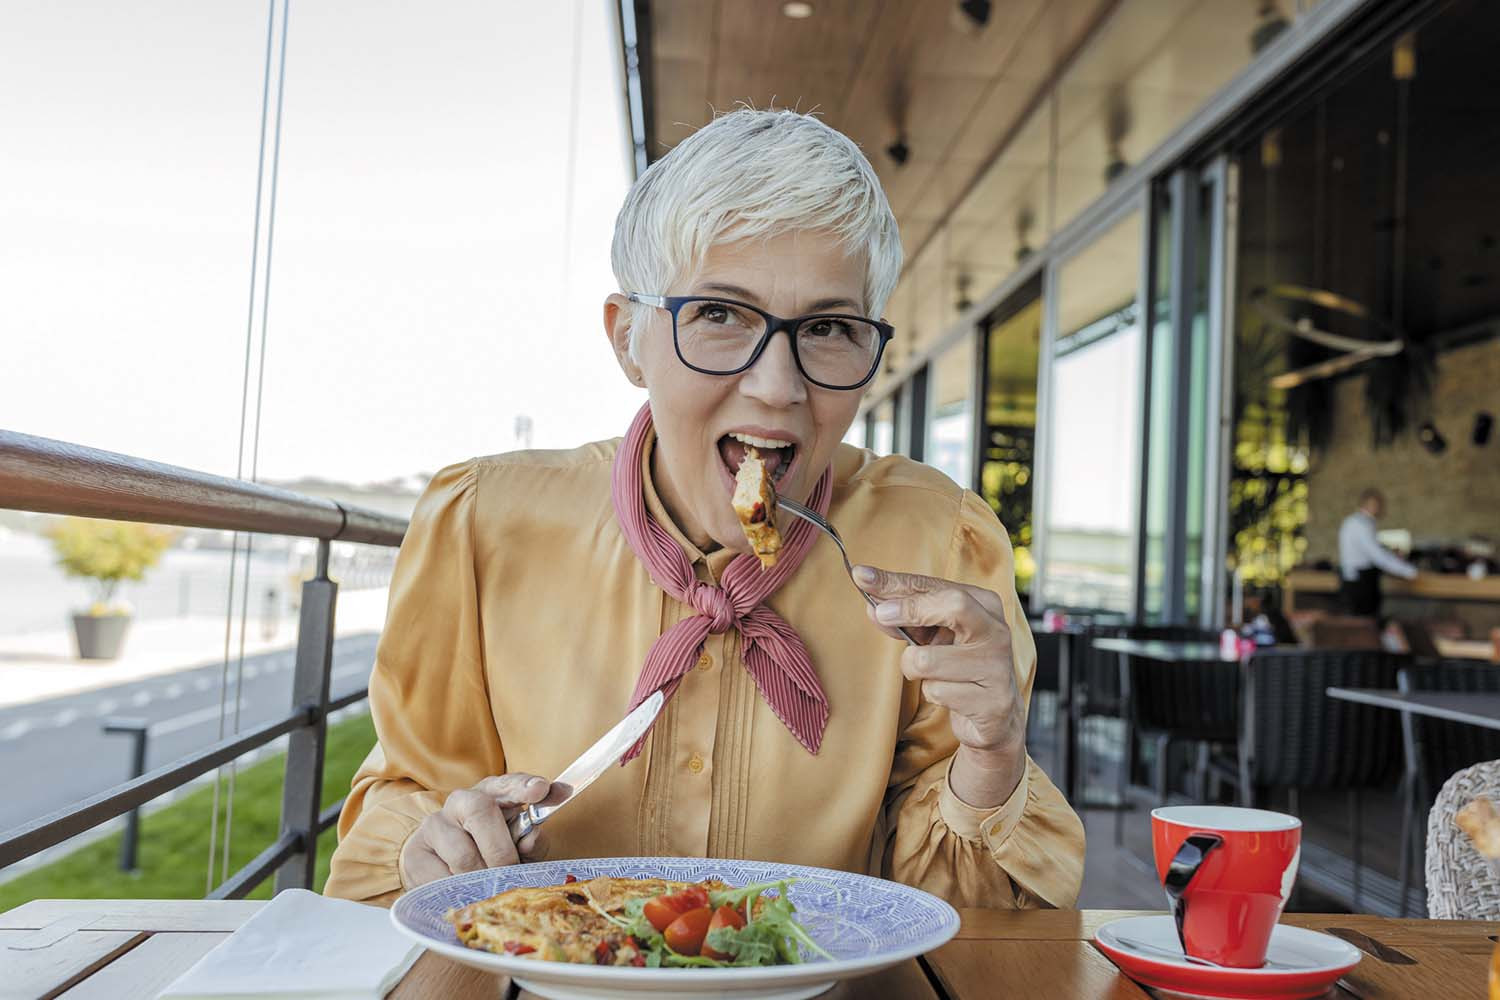 photo of a senior woman at a table on an outdoor balcony, holding a fork and about to put a bite of chicken into her mouth